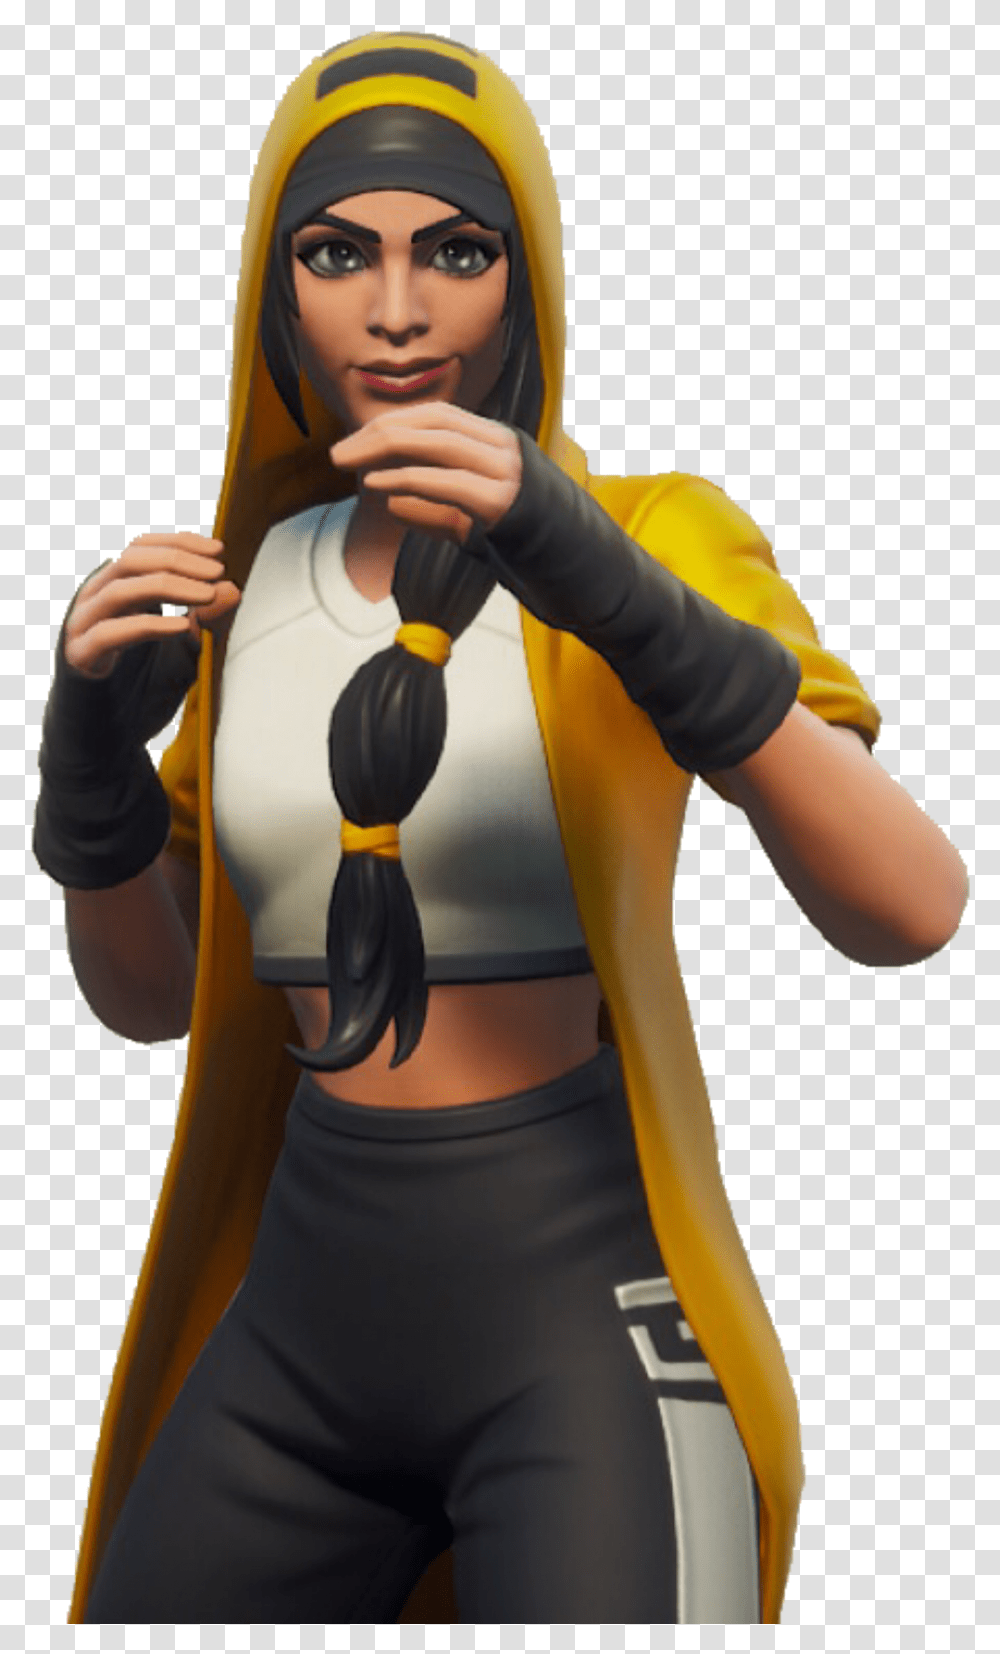 Fortnite Clutch Freetoedit Clutch Fortnite Yellow, Costume, Person, Face Transparent Png